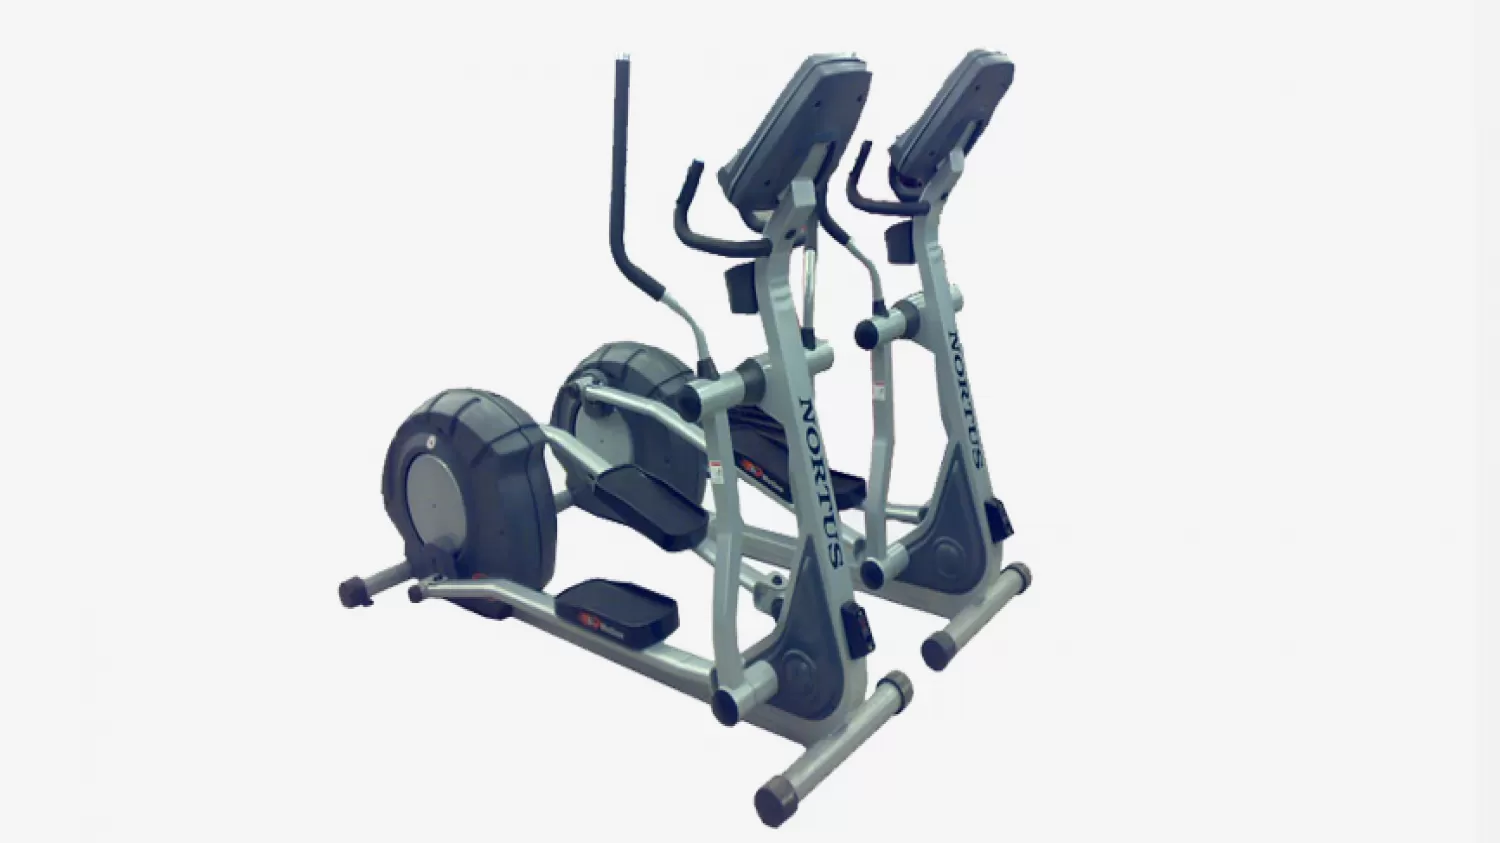 What to Consider While Buying Gym Equipment?